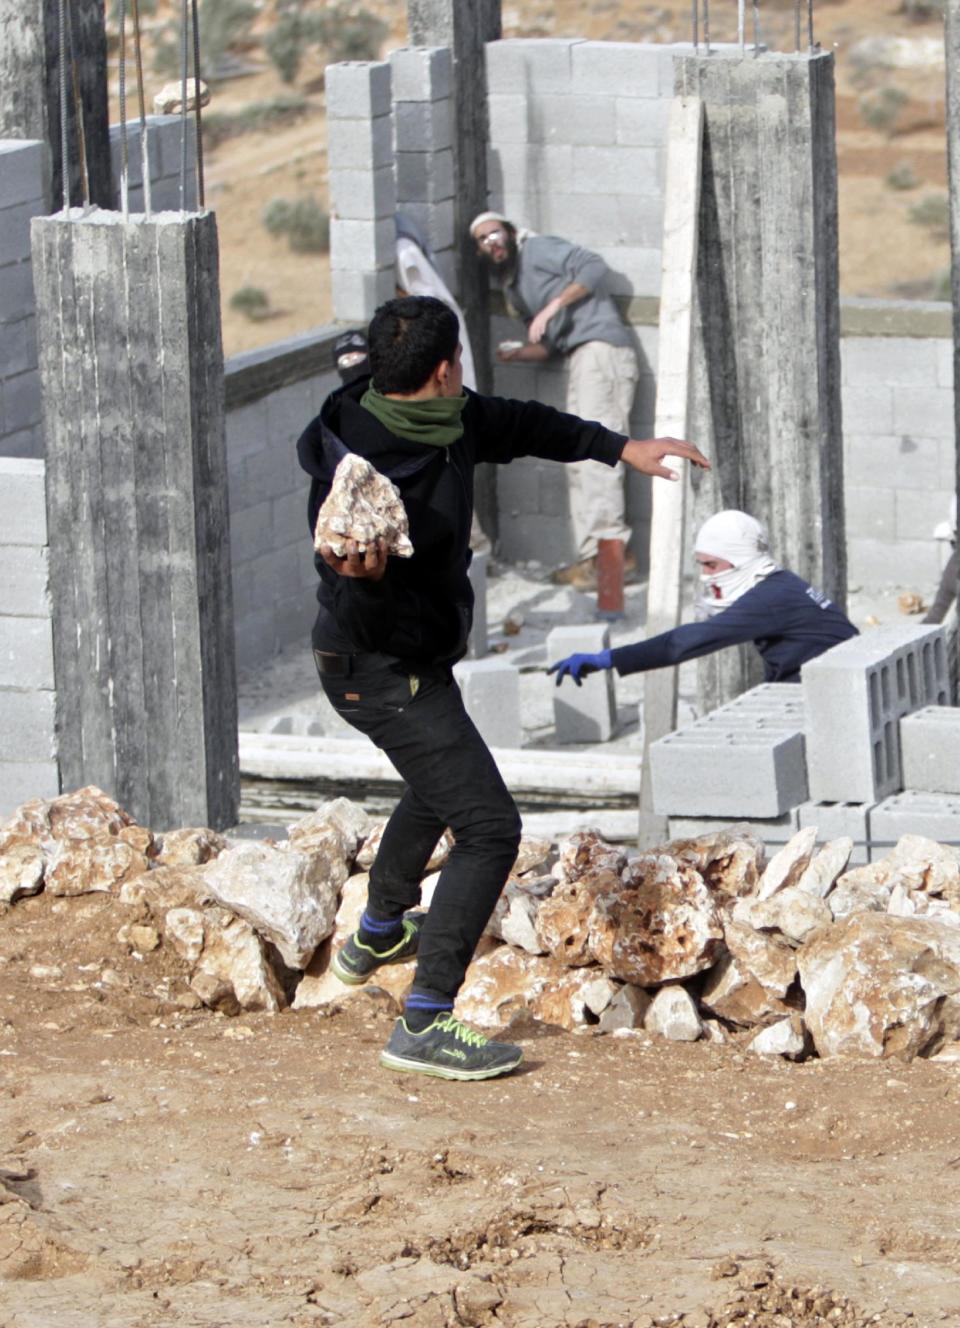 A Palestinian throws stones at Israeli settlers before they were detained by Palestinian villagers in a building under construction near the West Bank village of Qusra, southeast of the city of Nablus, Tuesday, Jan. 7, 2014. Palestinians held more than a dozen Israeli settlers for about two hours Tuesday in retaliation for the latest in a string of settler attacks on villages in the area, witnesses said. The military said the chain of events apparently began after Israeli authorities removed an illegally built structure in Esh Kodesh, a rogue Israeli settlement in the area. In recent years, militant settlers have often responded to any attempts by the Israeli military to remove parts of dozens of rogue settlements, or outposts, by attacking Palestinians and their property. The tactic, begun in 2008, is known as "price tag." (AP Photo/Nasser Ishtayeh)